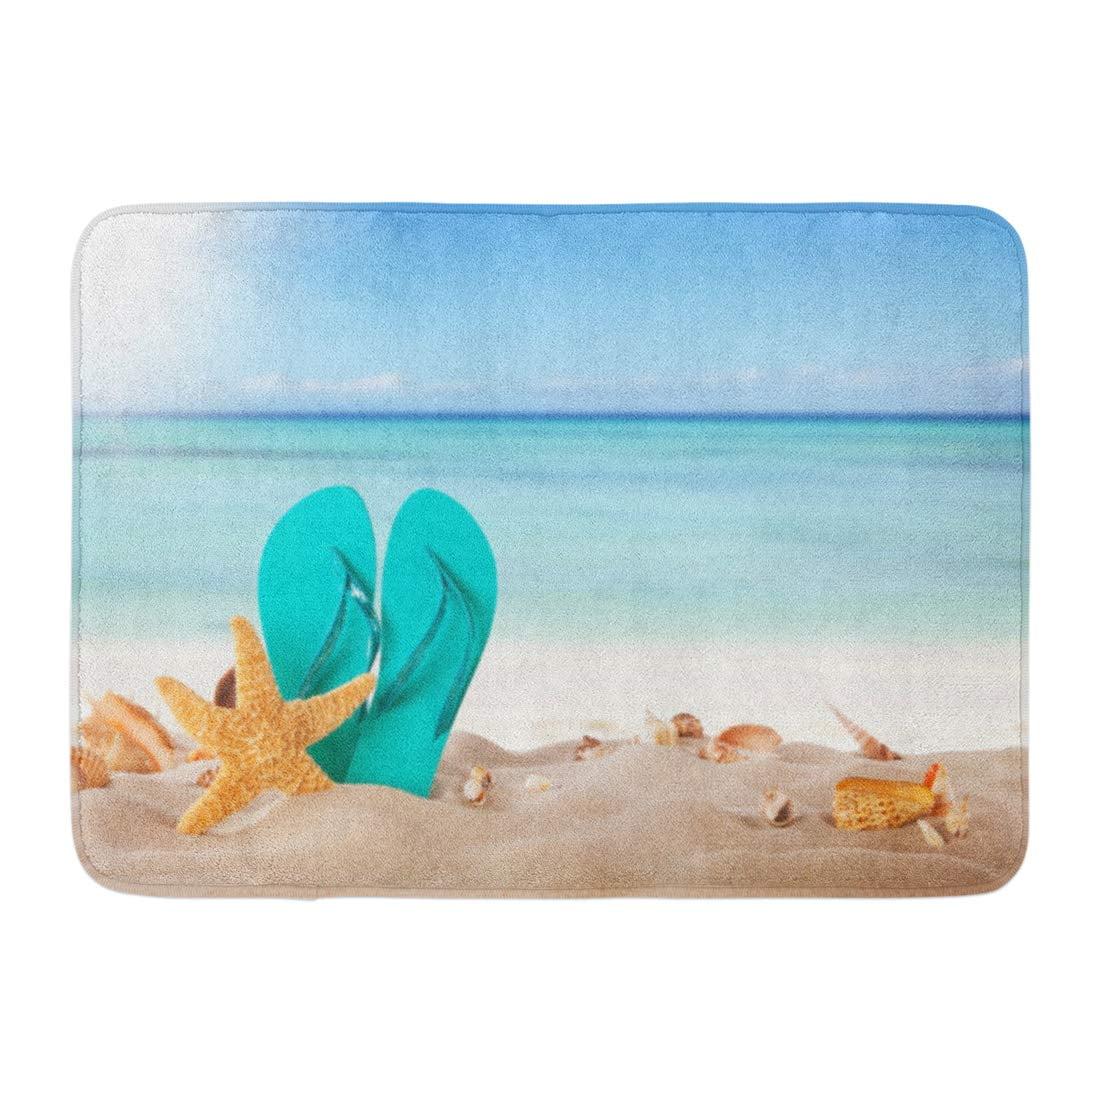 GODPOK Aquatic Sand Summer Concept with Sandy Beach Shells and Blue ...